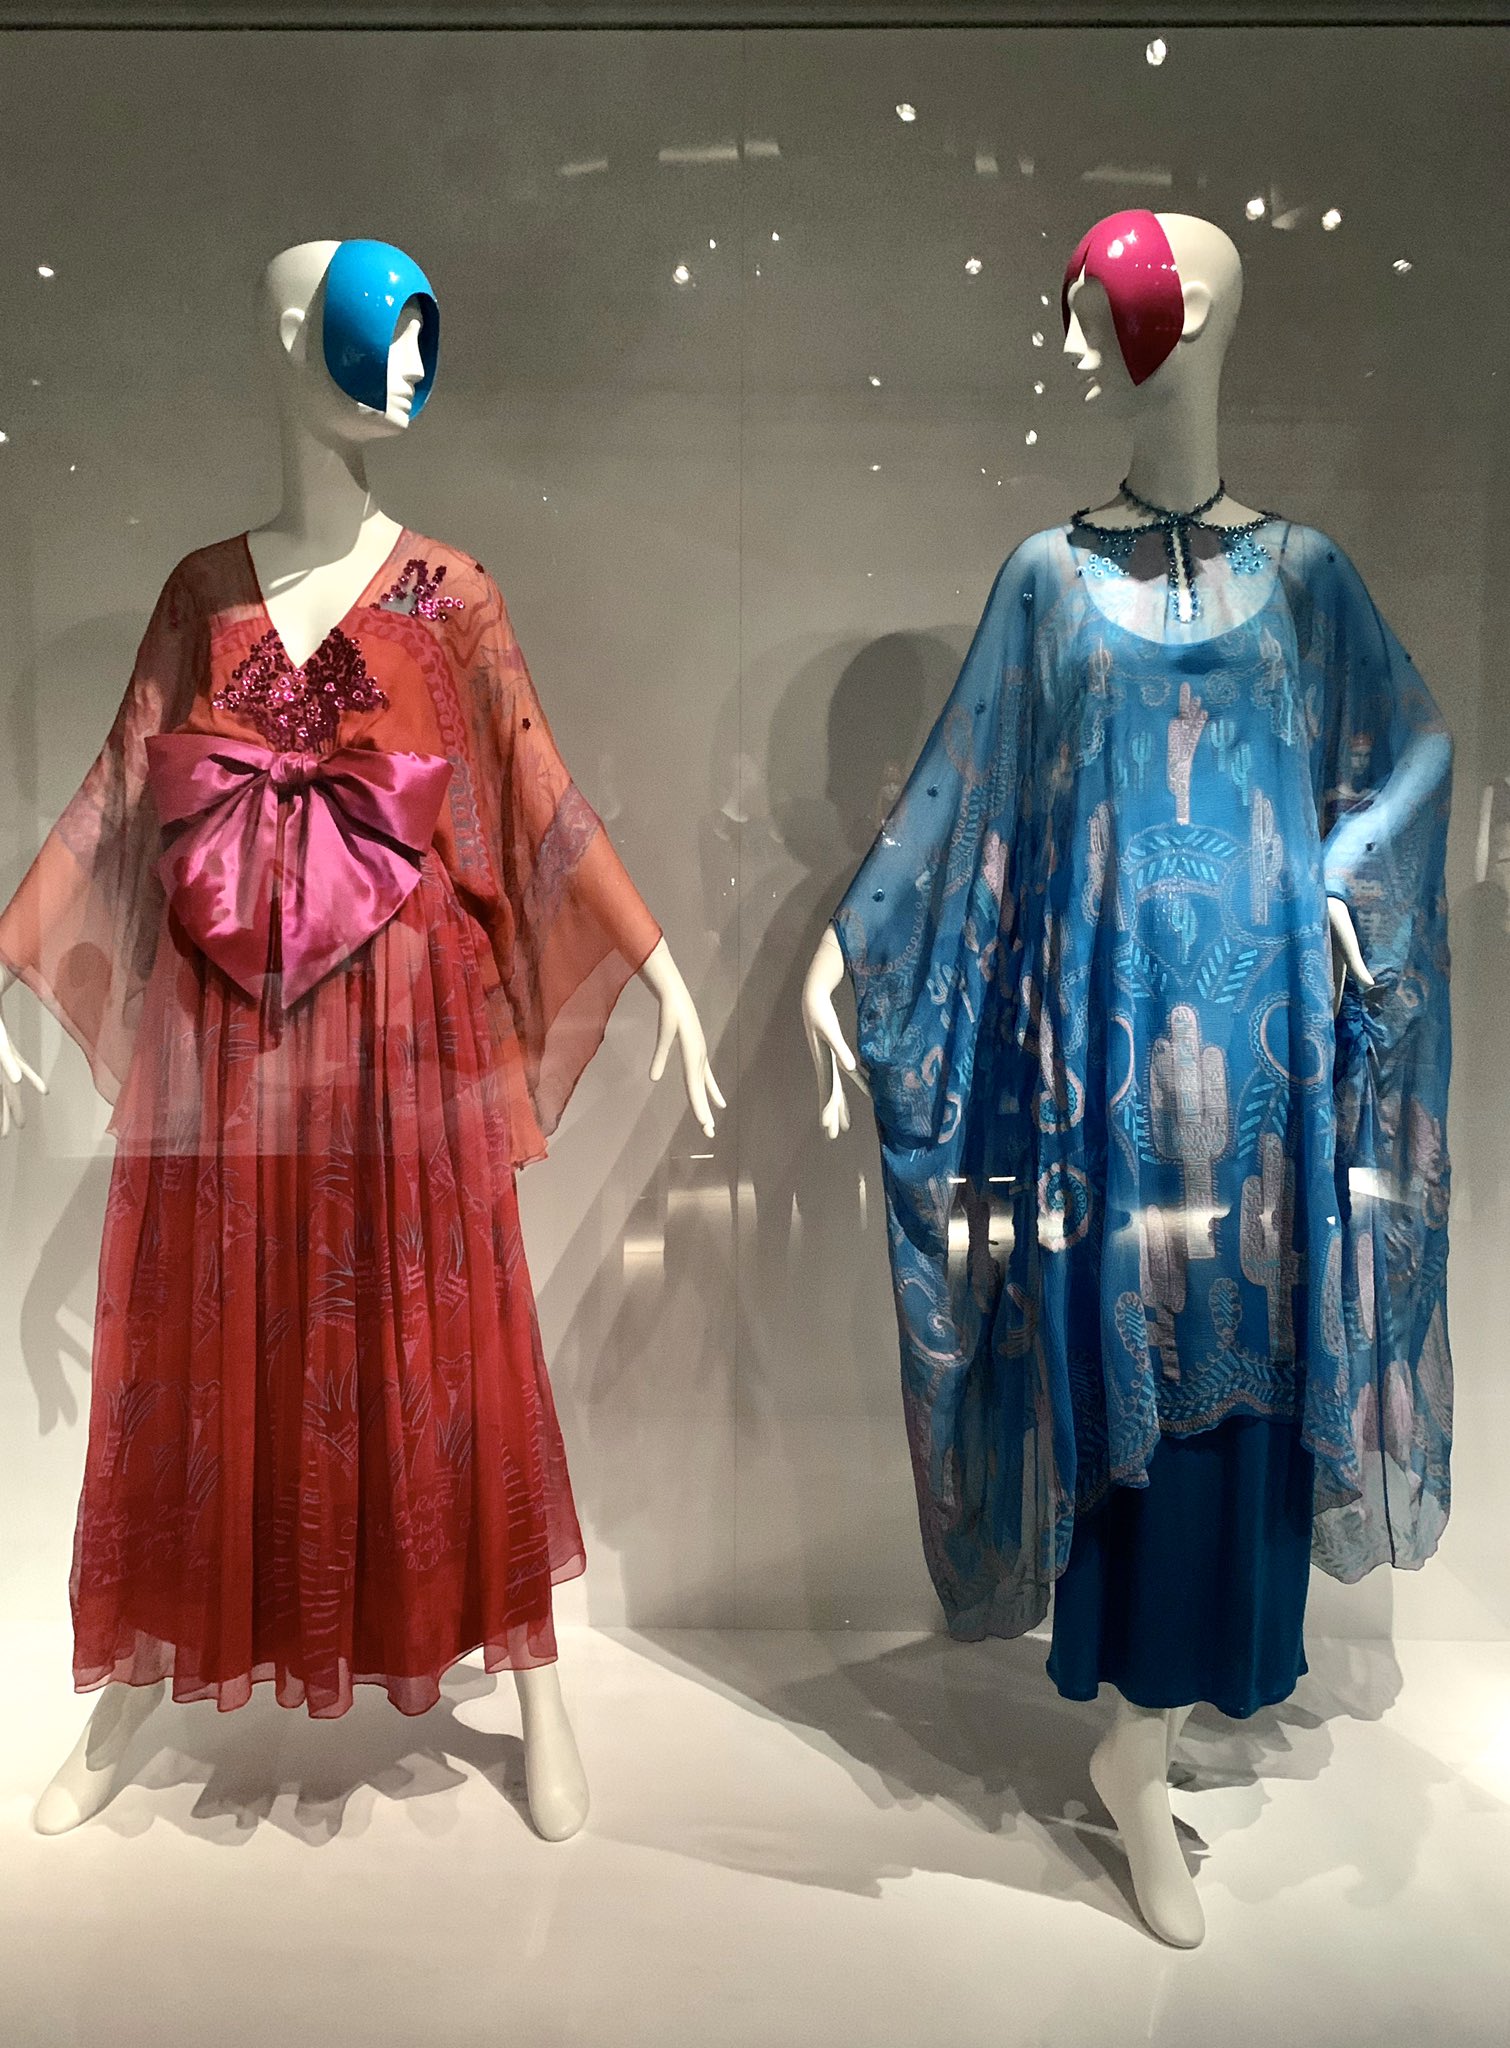 archivealive on X: ”The Message is the Medium: Fashion That Speaks”  gallery of “In Pursuit of Fashion: The Sandy Schreier Collection”  highlights contemporary post-WWII fashion w/ designs from Stephen Sprouse,  Chloè, Patrick